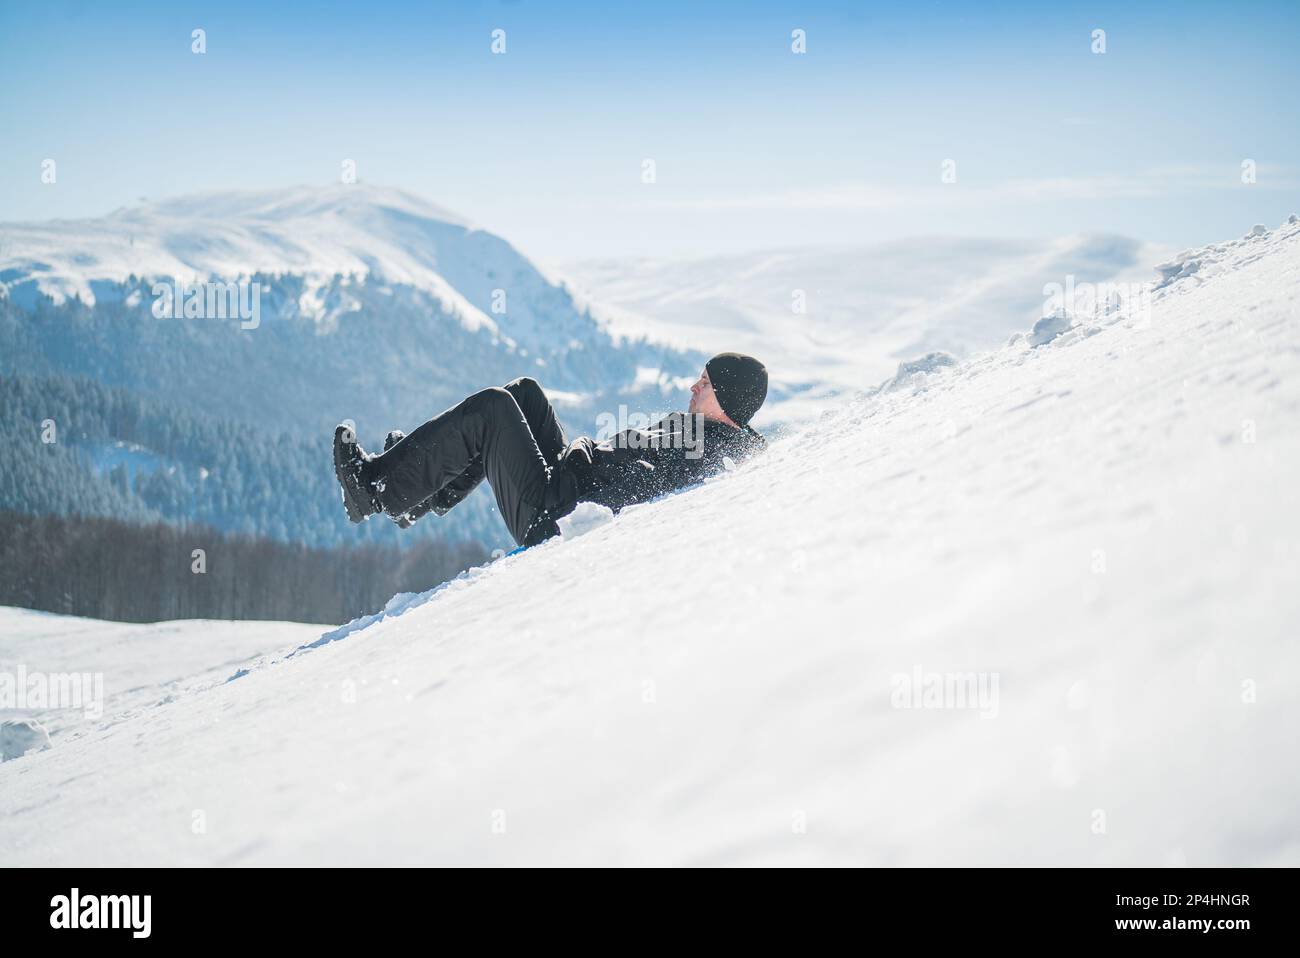 https://c8.alamy.com/comp/2P4HNGR/man-sliding-on-steep-slope-in-the-mountain-2P4HNGR.jpg